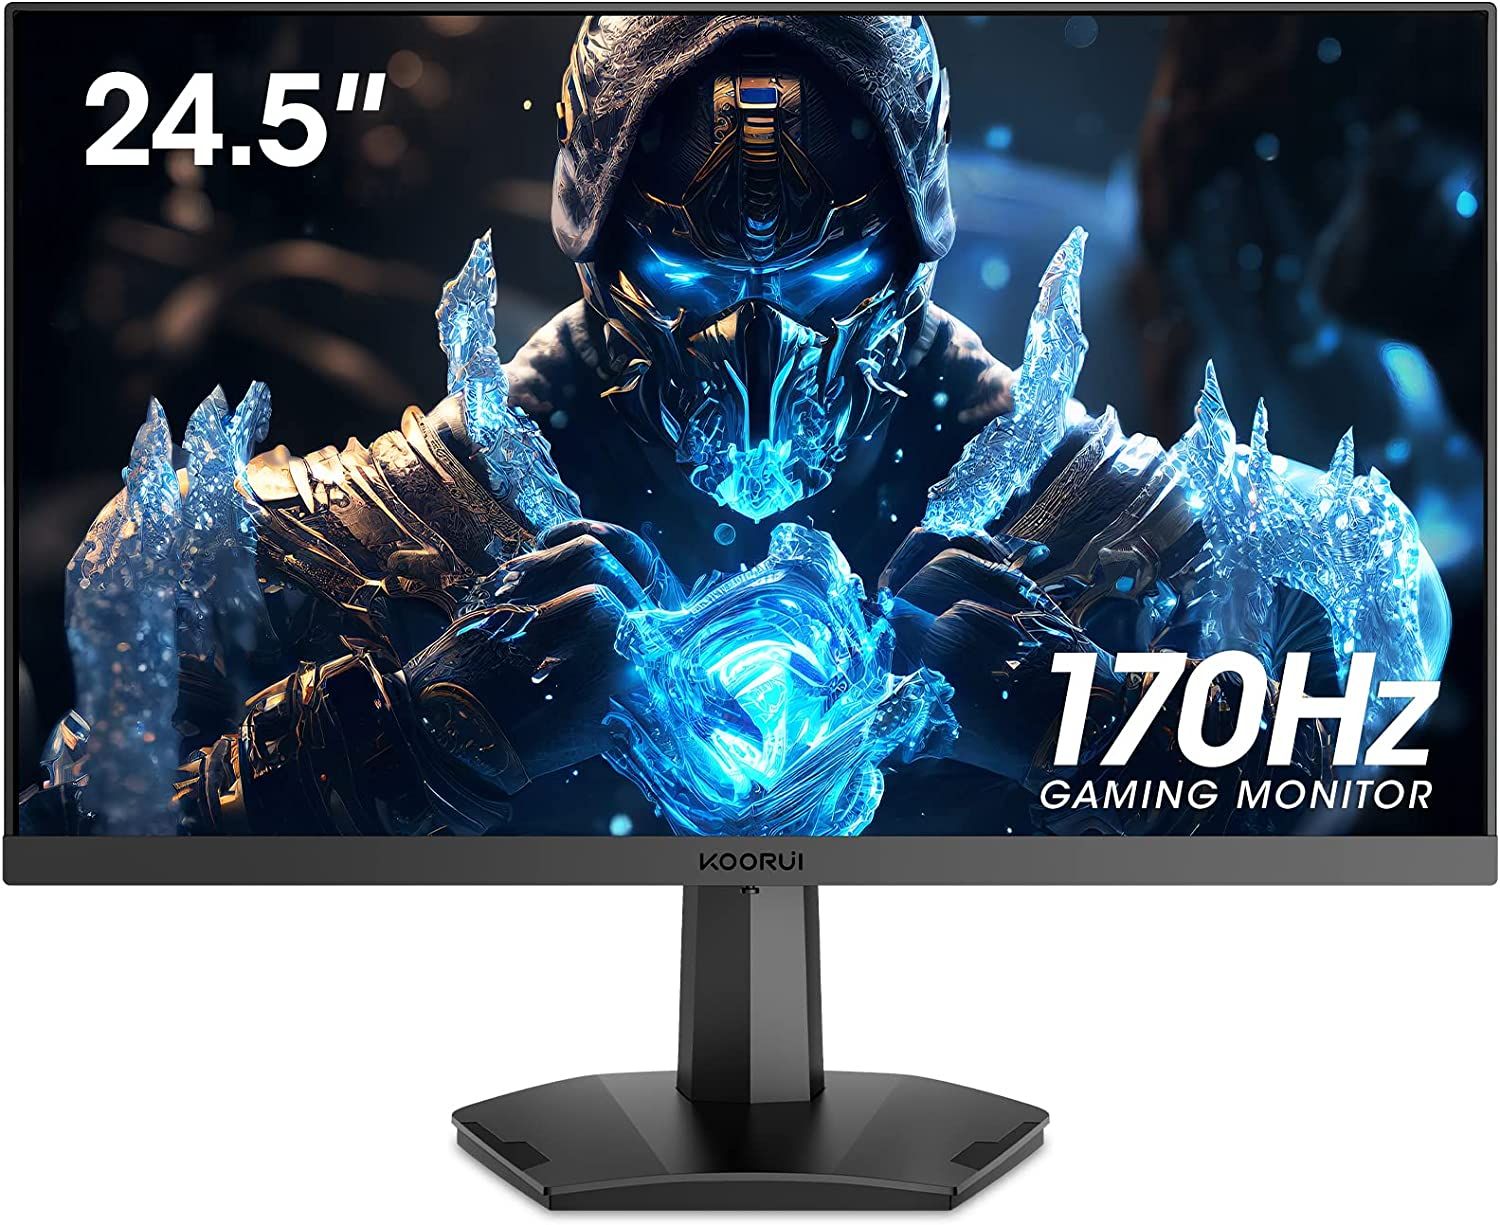 The Best Monitors For PS5